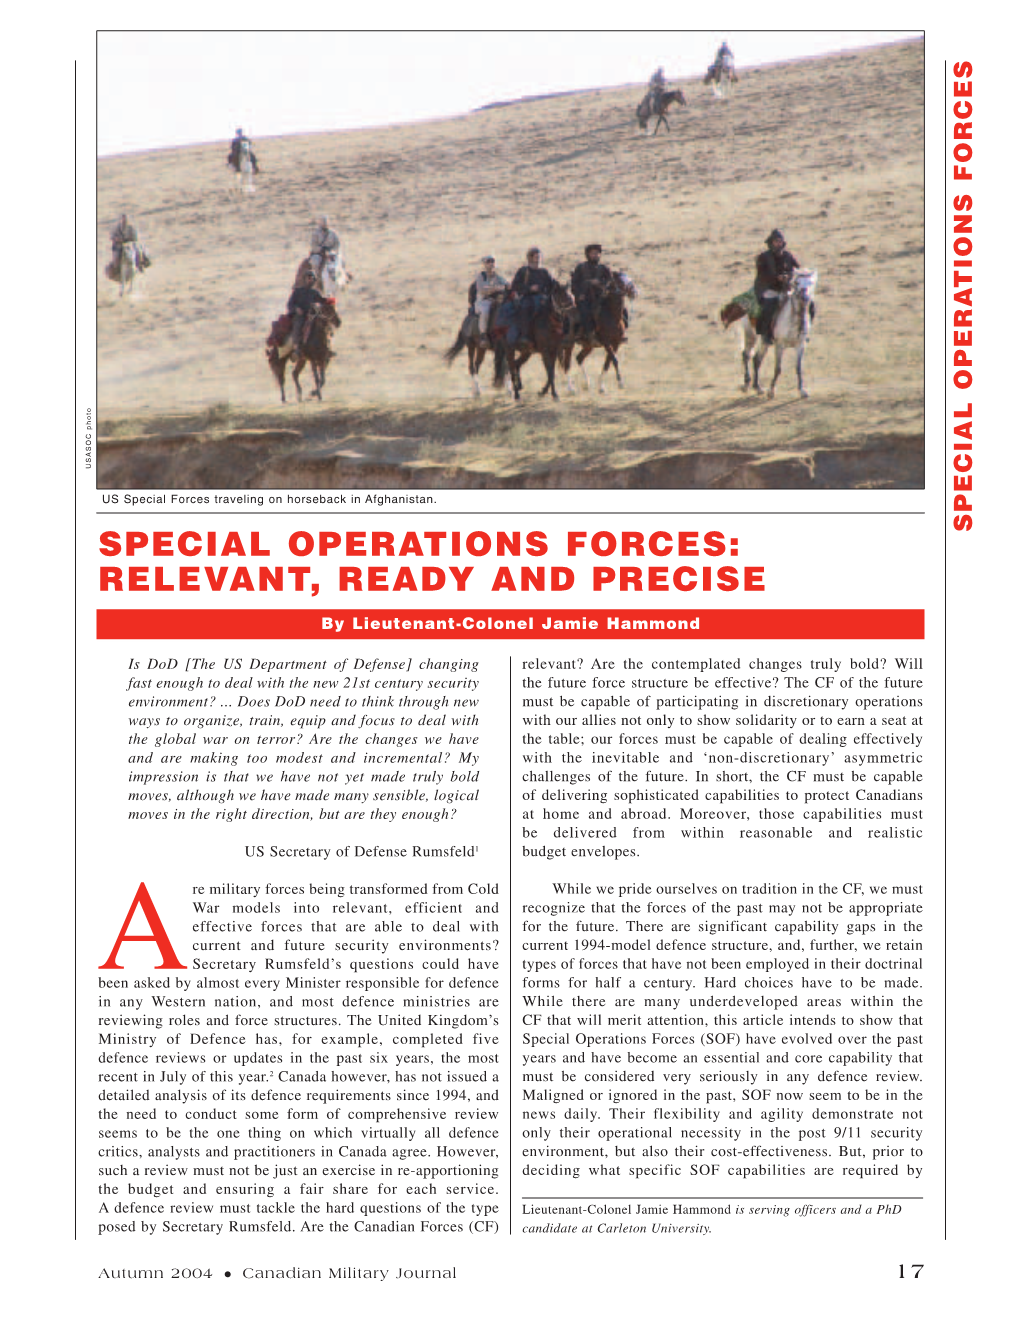 Special Operations Forces: Relevant, Ready and Precise